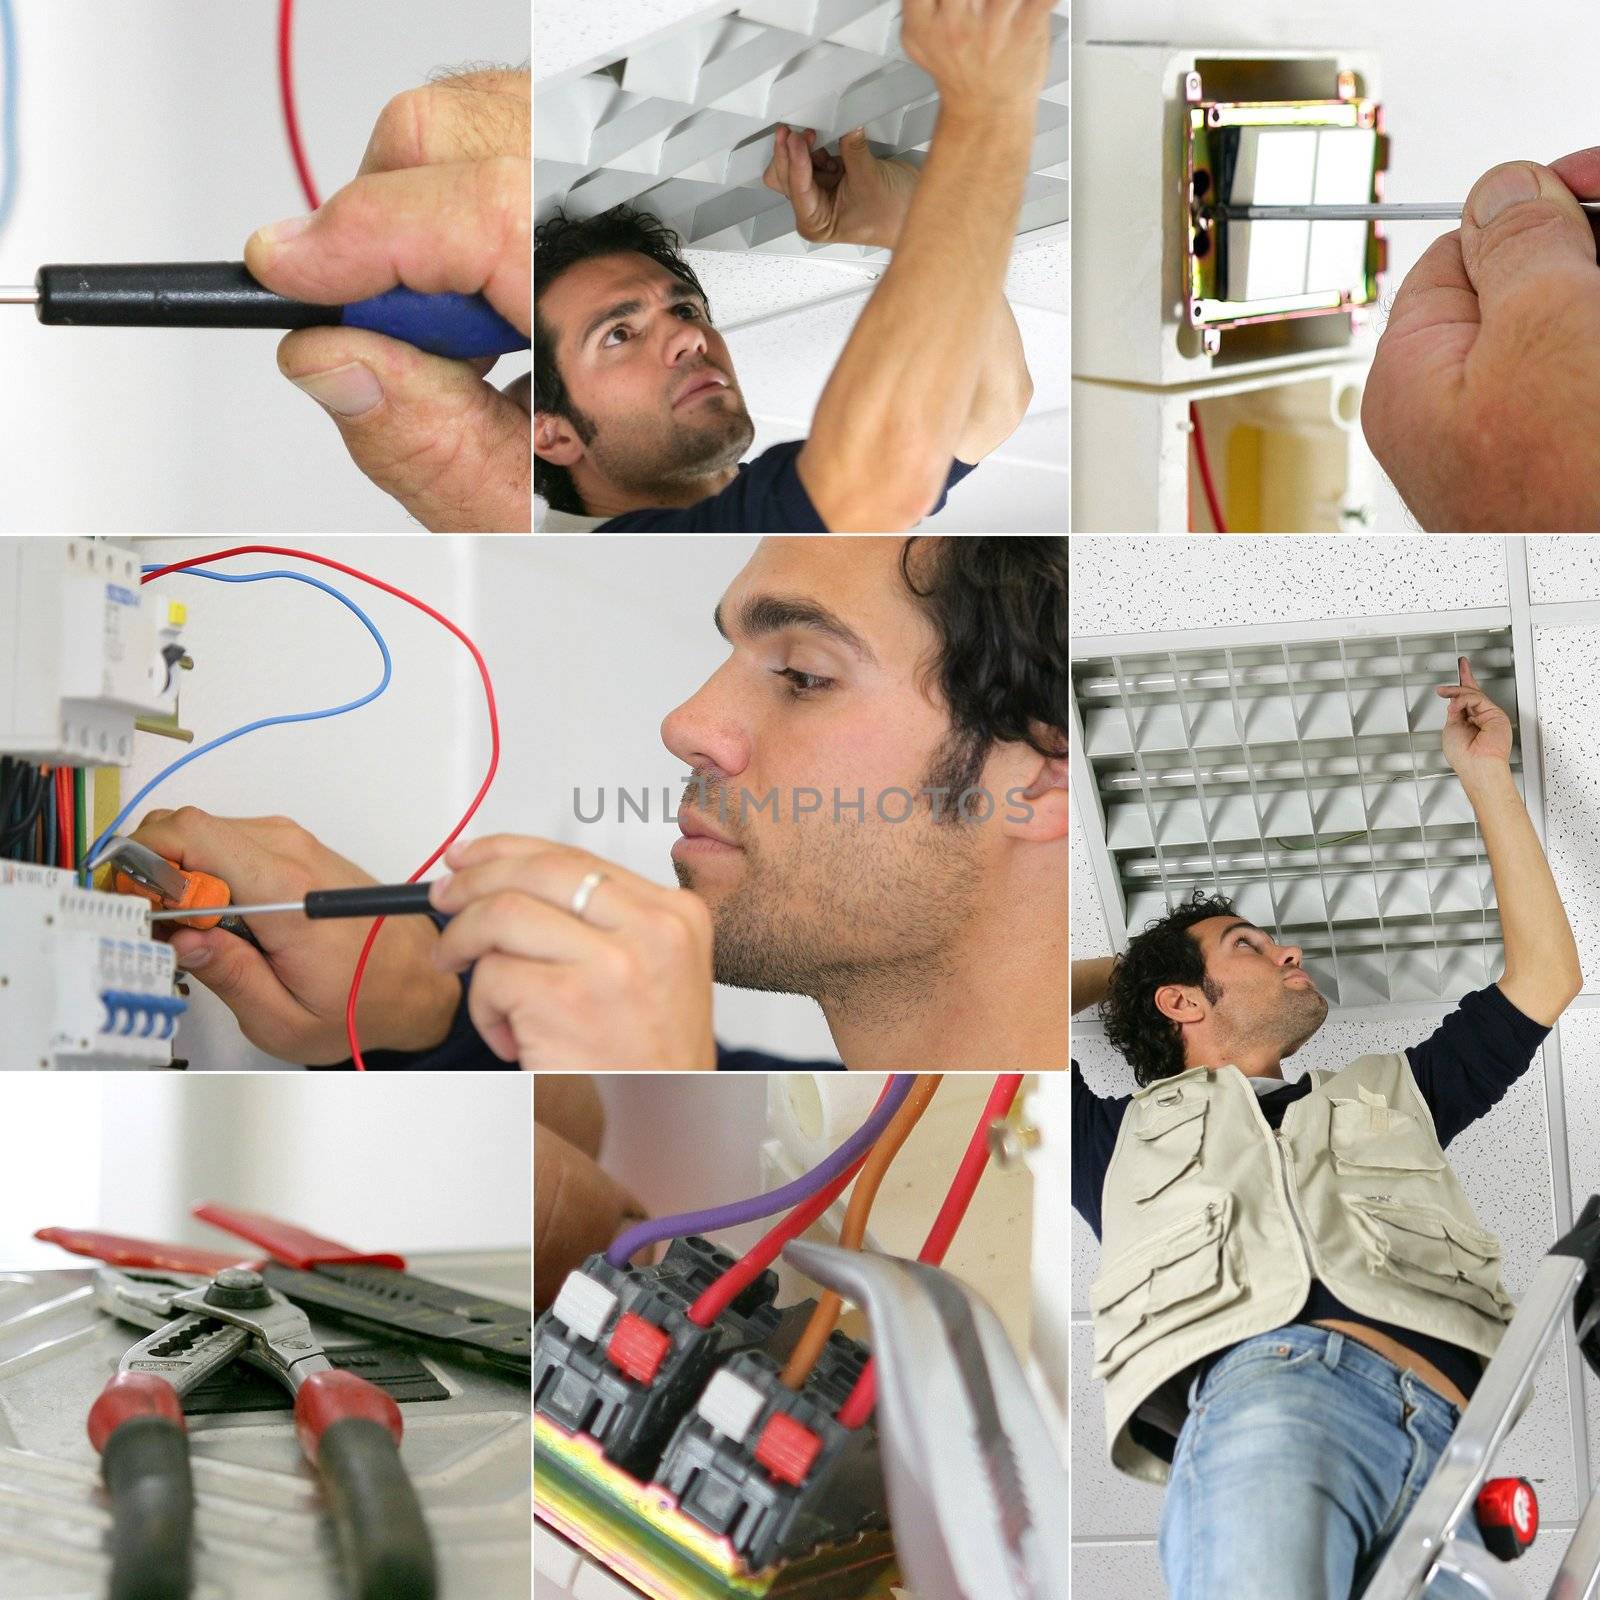 Photo-montage of an electrician at work by phovoir